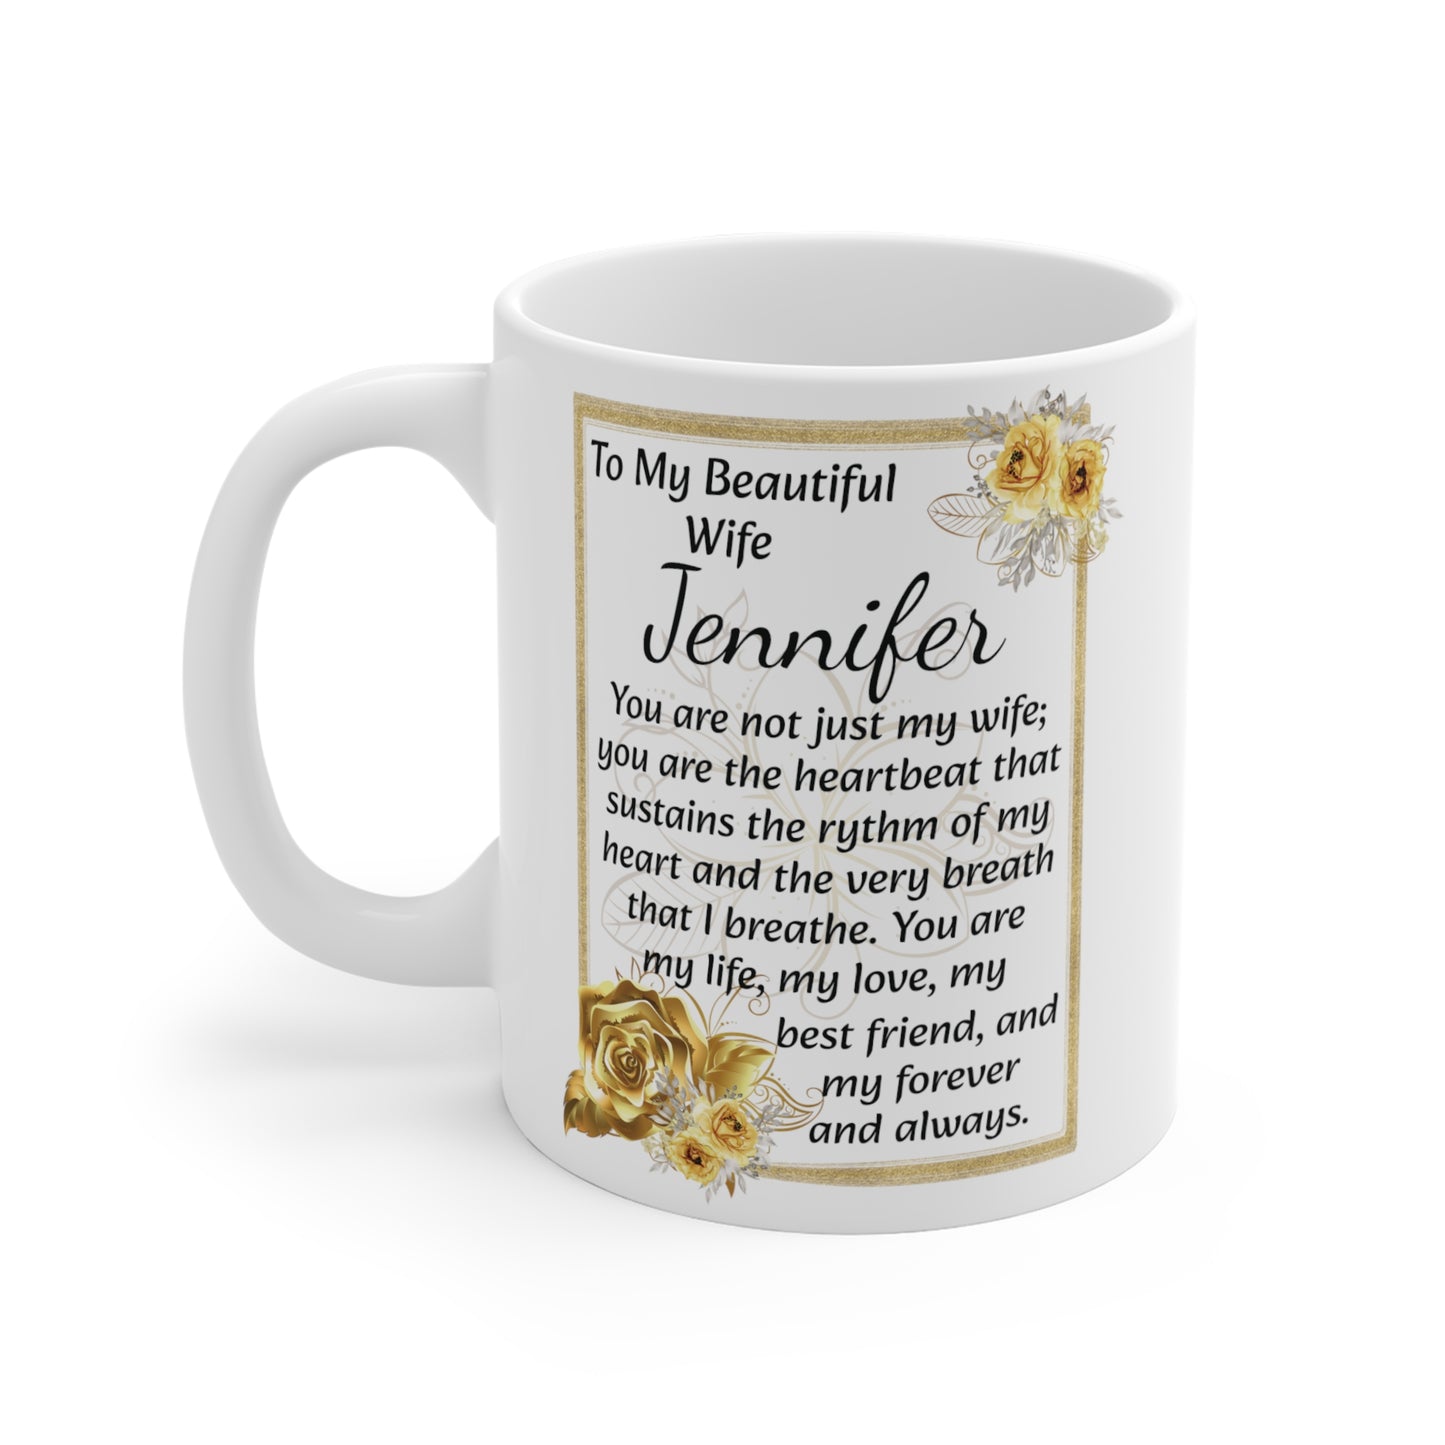 11 oz coffee cup for wife, gift for wife, gift to wife from husband, coffee mug, gift for coffee lover